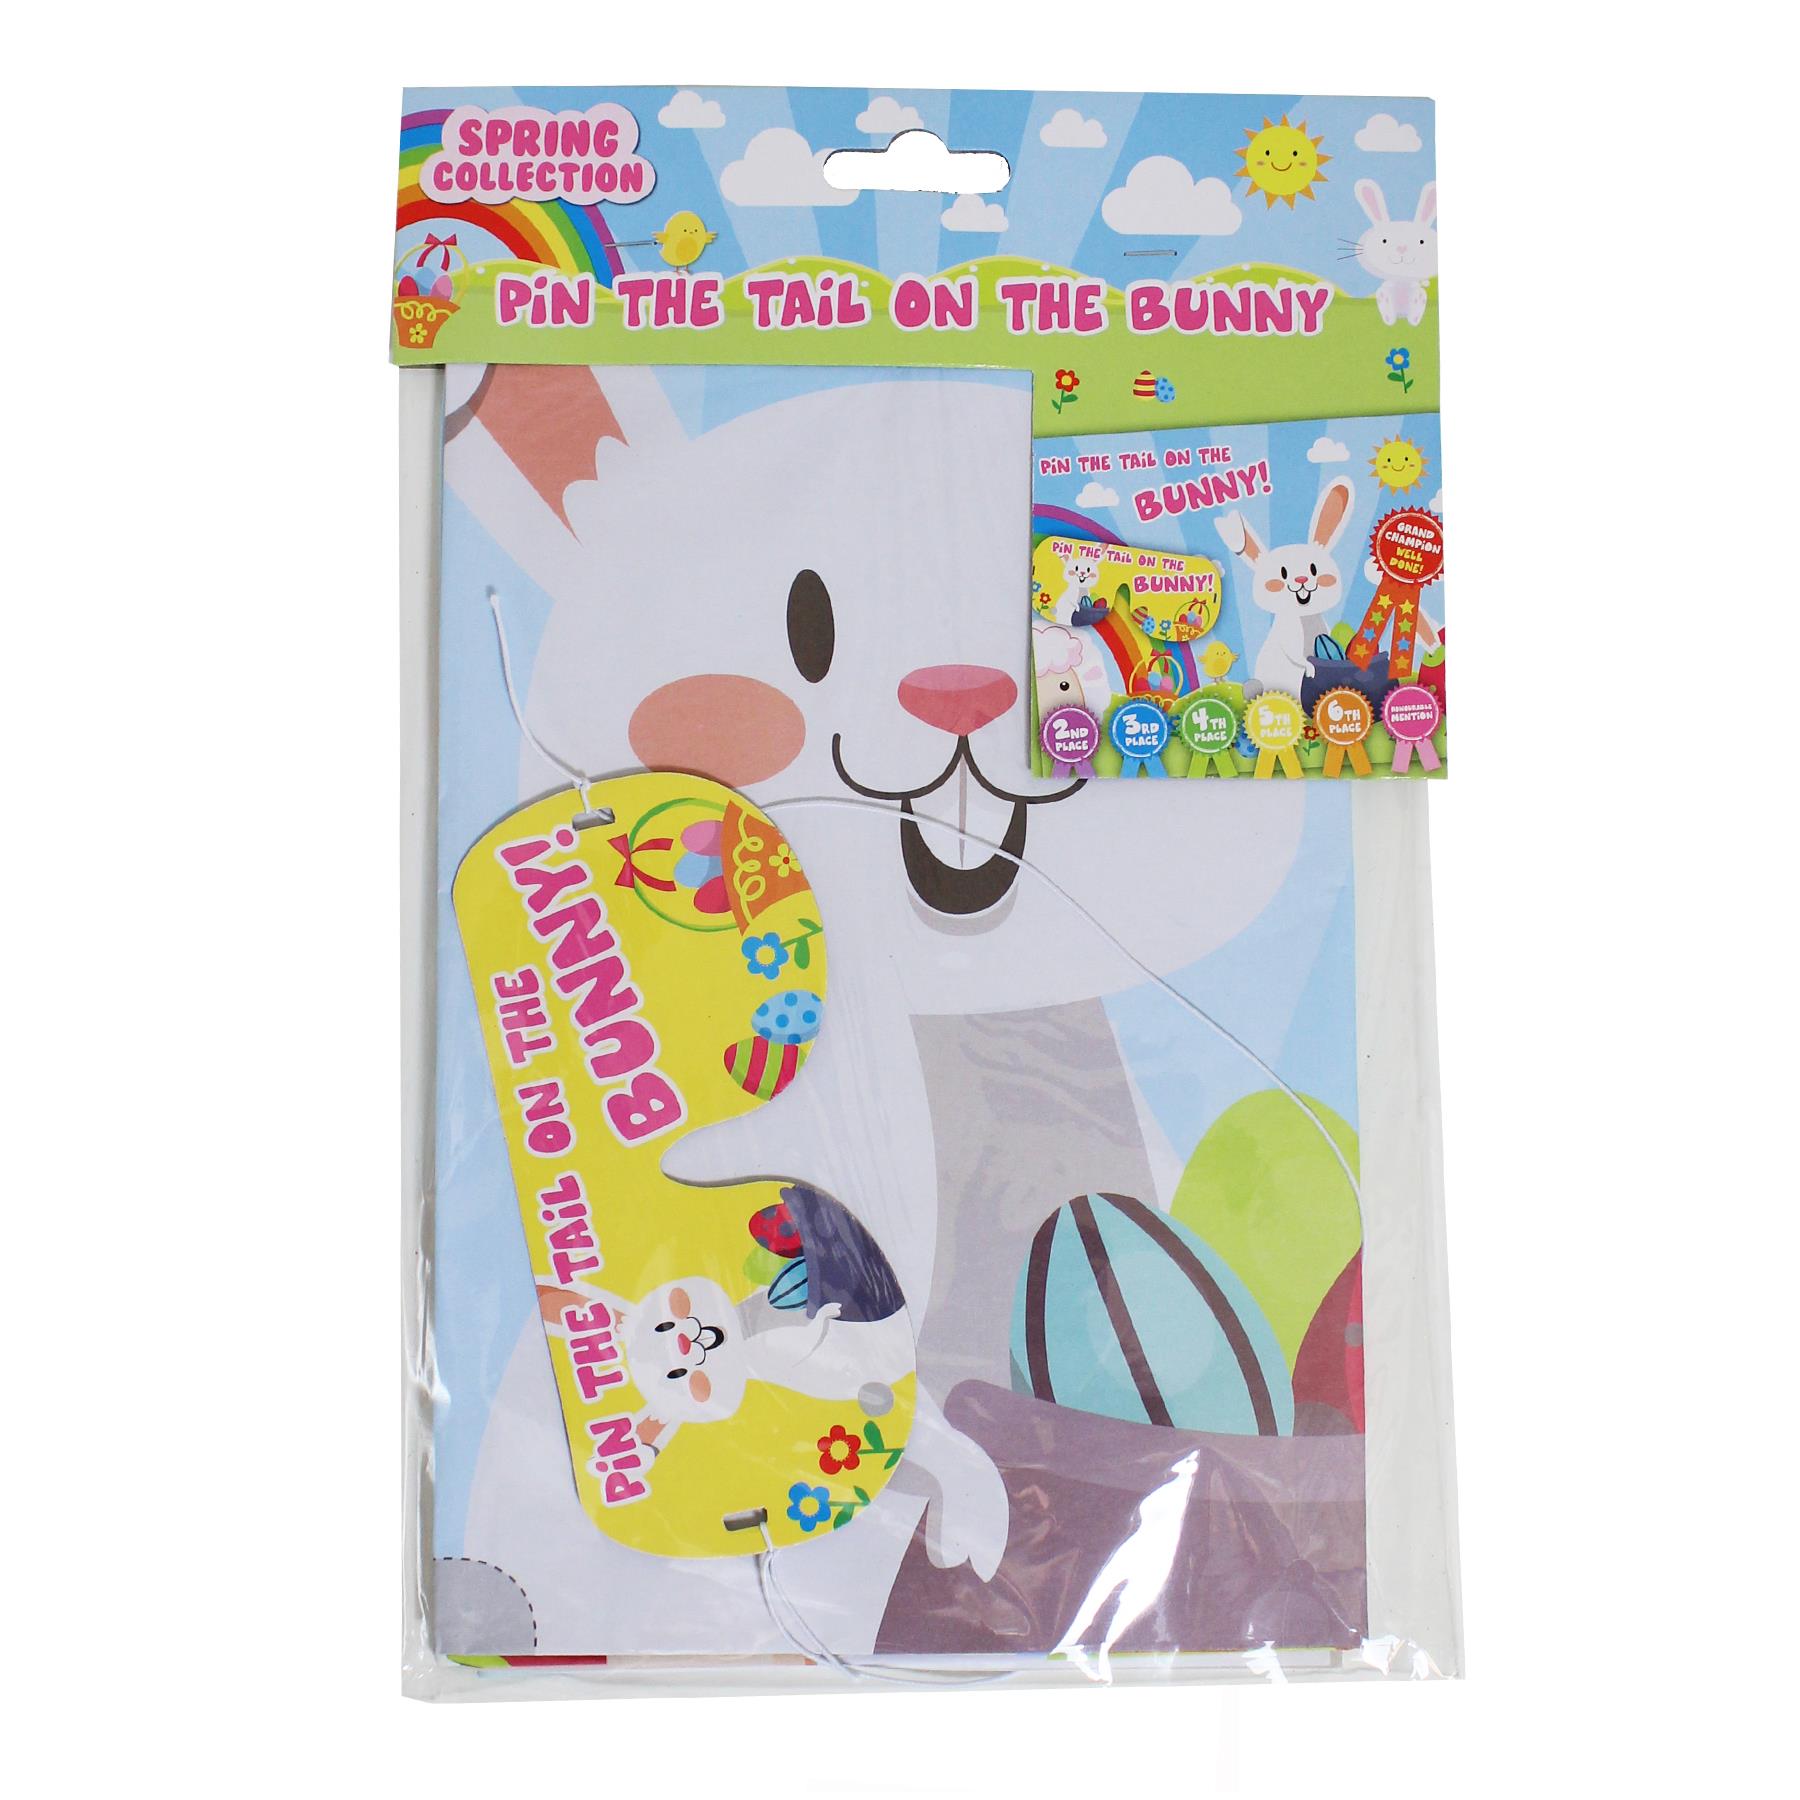 Easter Egg Hunt Accessories and Games - Pin tail on the Bunny Game